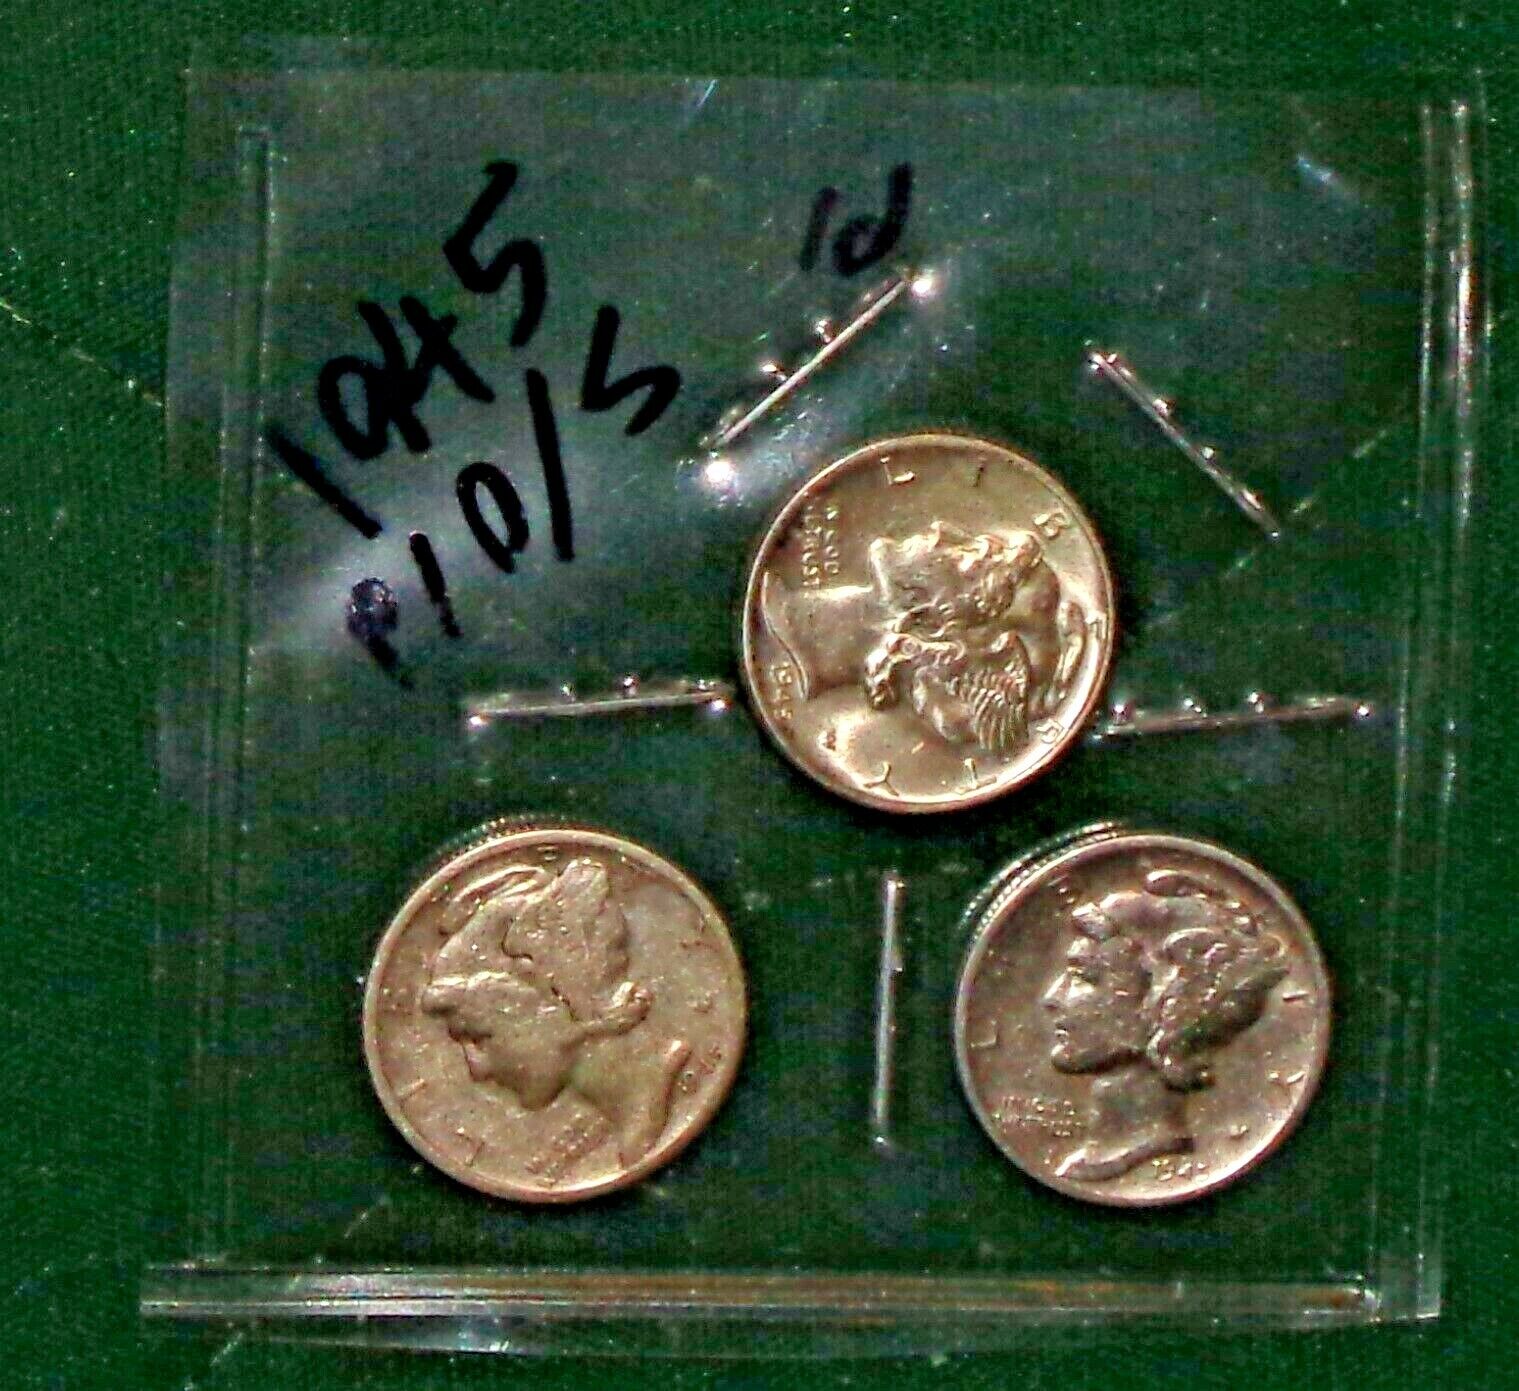 THREE VERY GOOD TO EXTREMEL FINE 1945 SILVER MERCURY DIMES - FRO